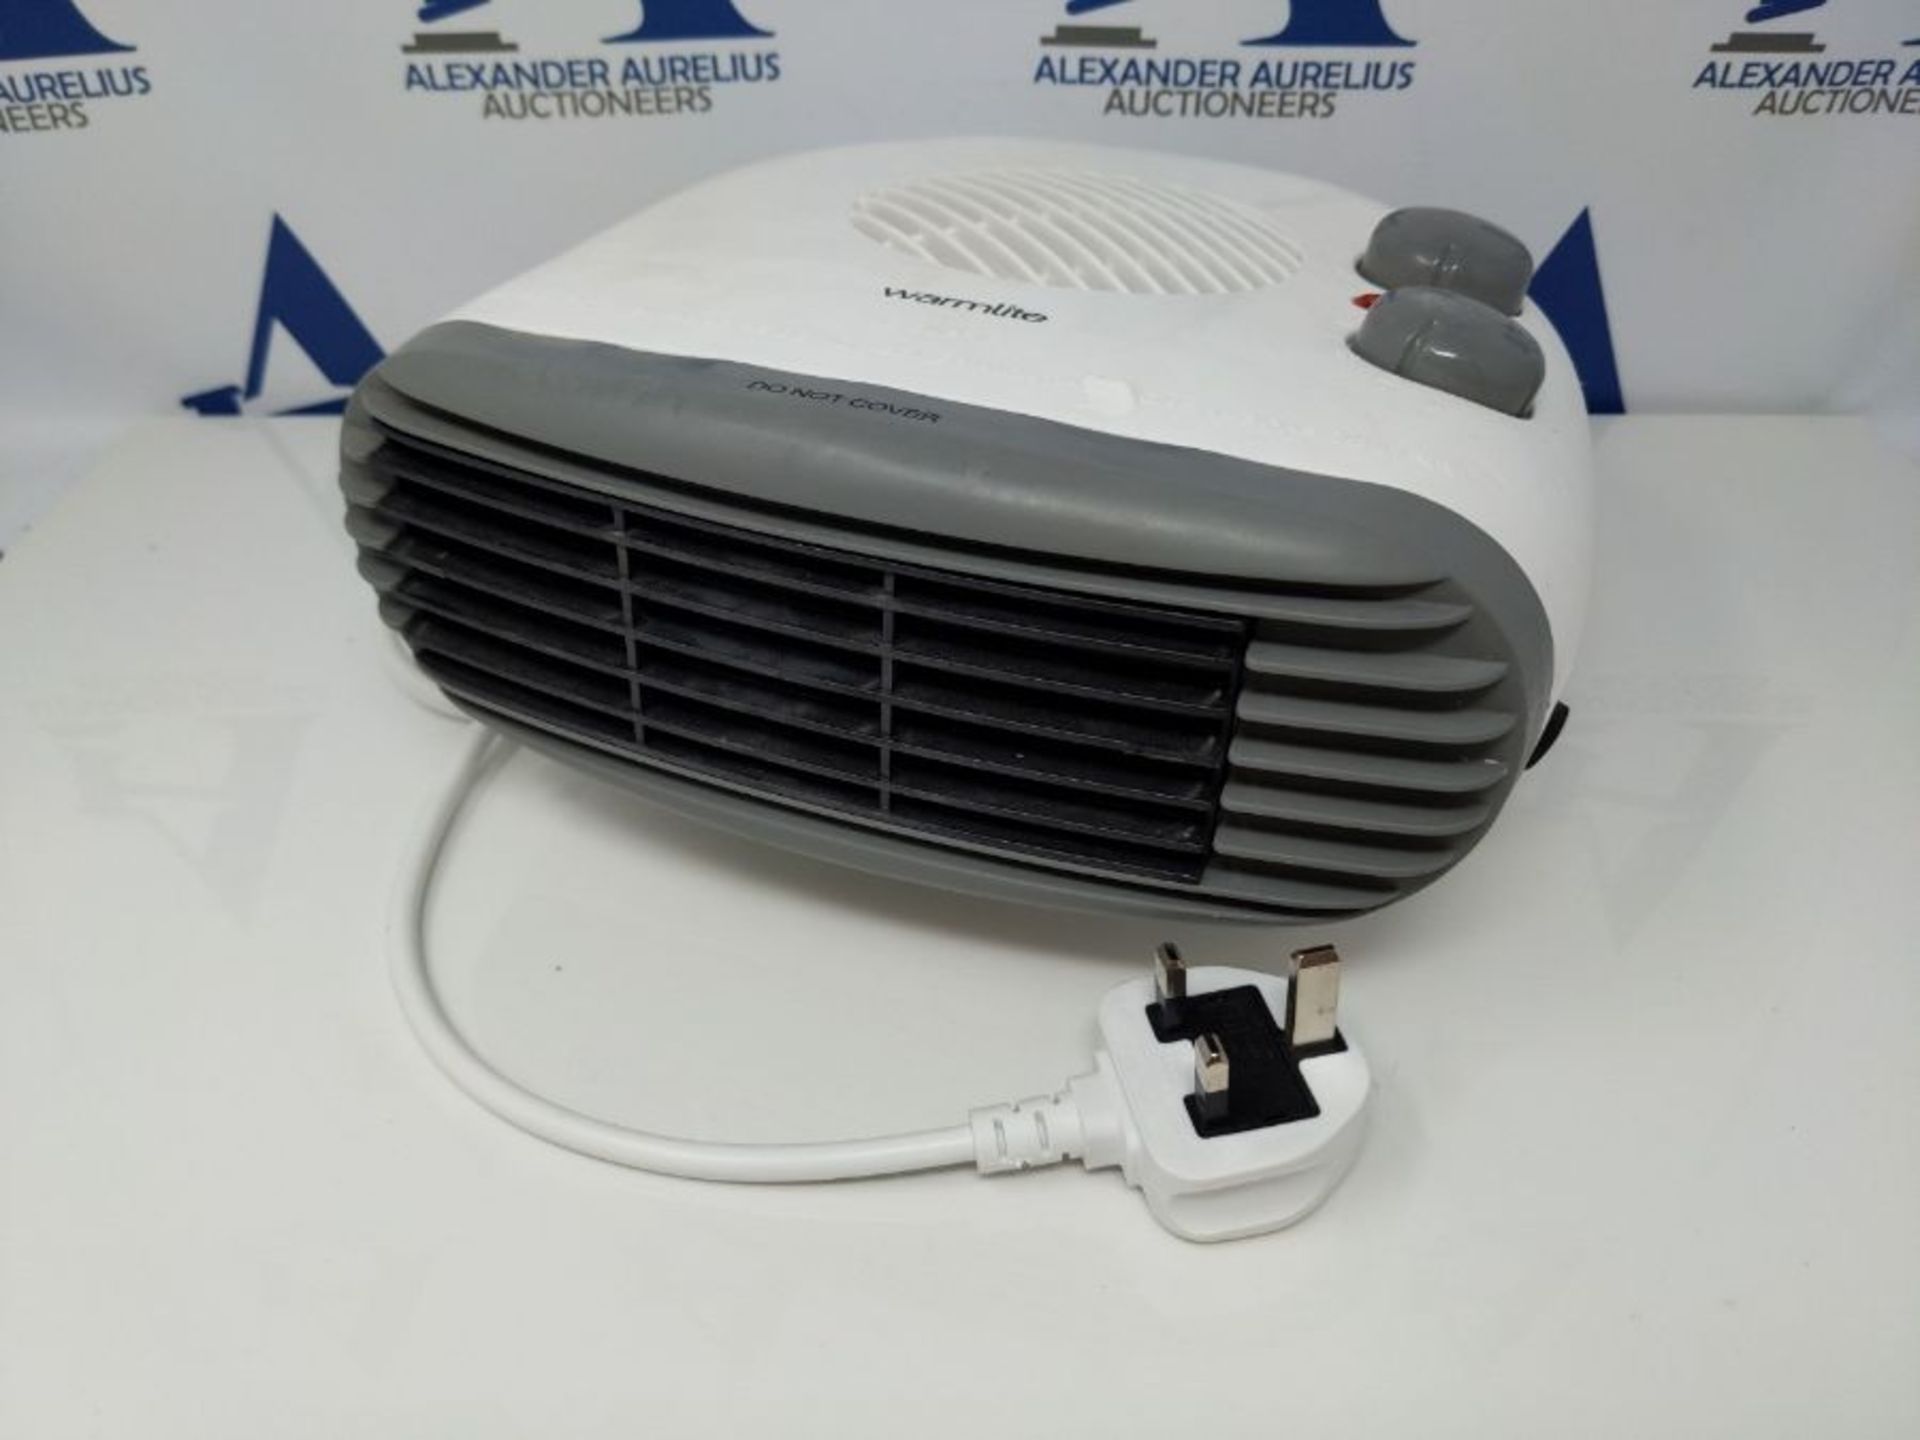 Warmlite WL44004 2000W Portable Flat Fan Heater with 2 Heat Settings and Overheat Prot - Image 3 of 3